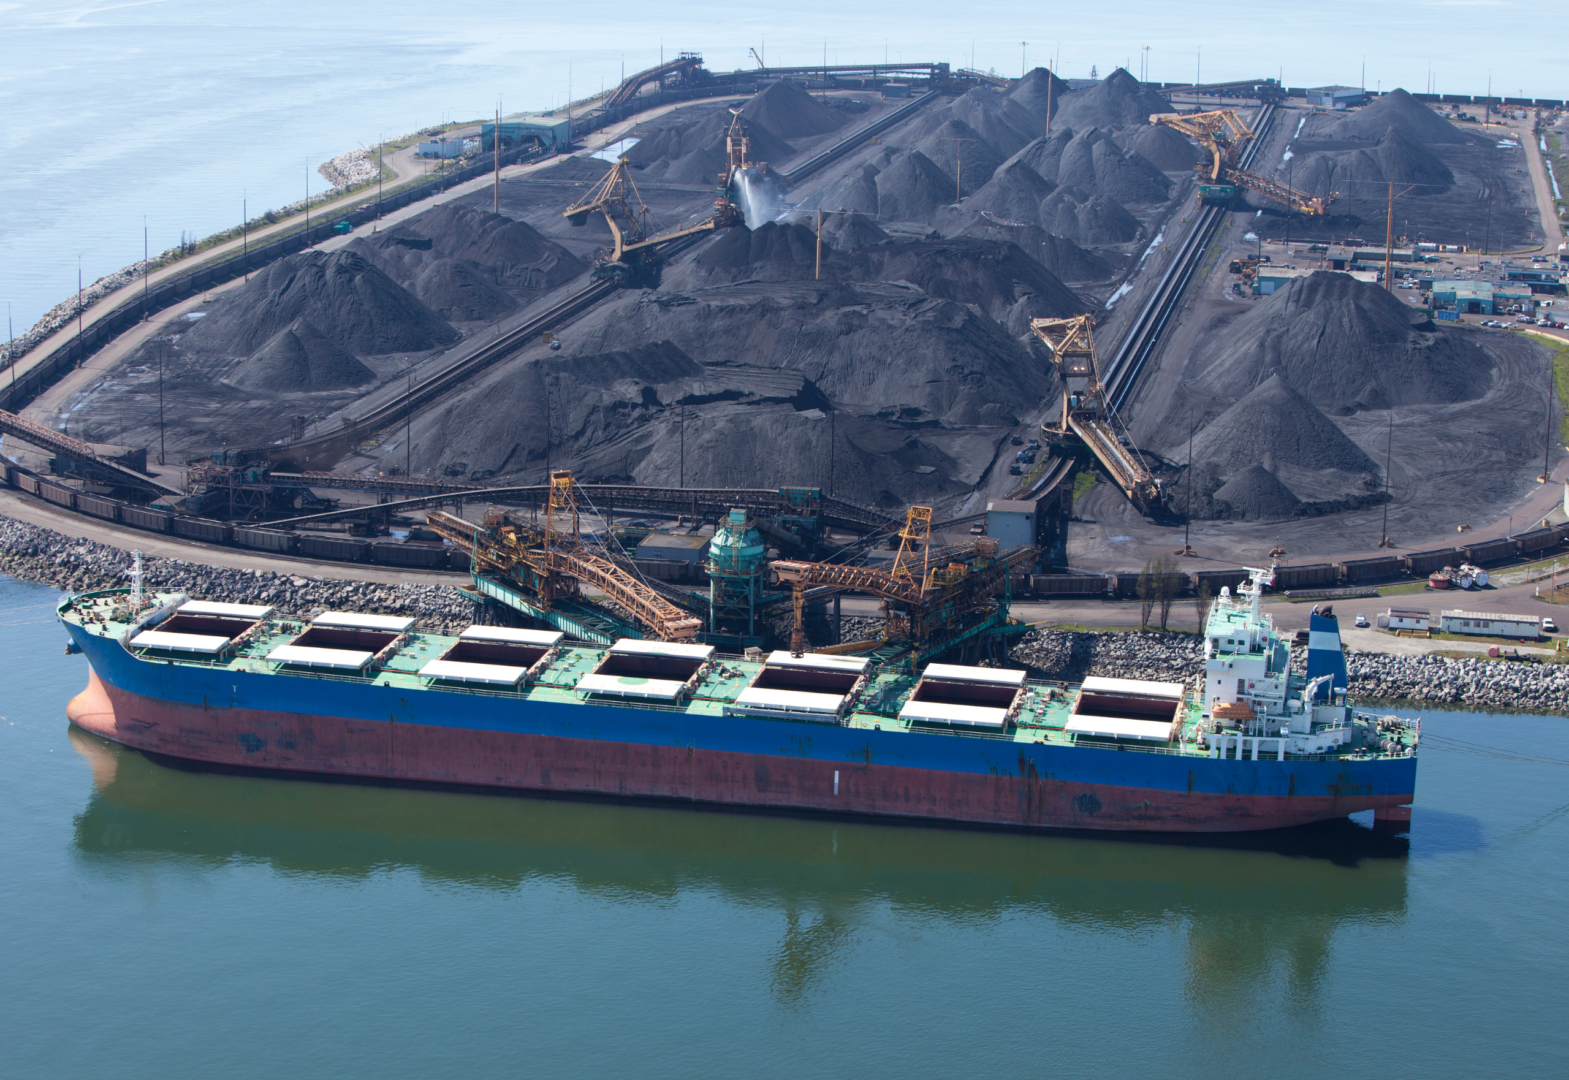 A cargo ship is loaded with coal